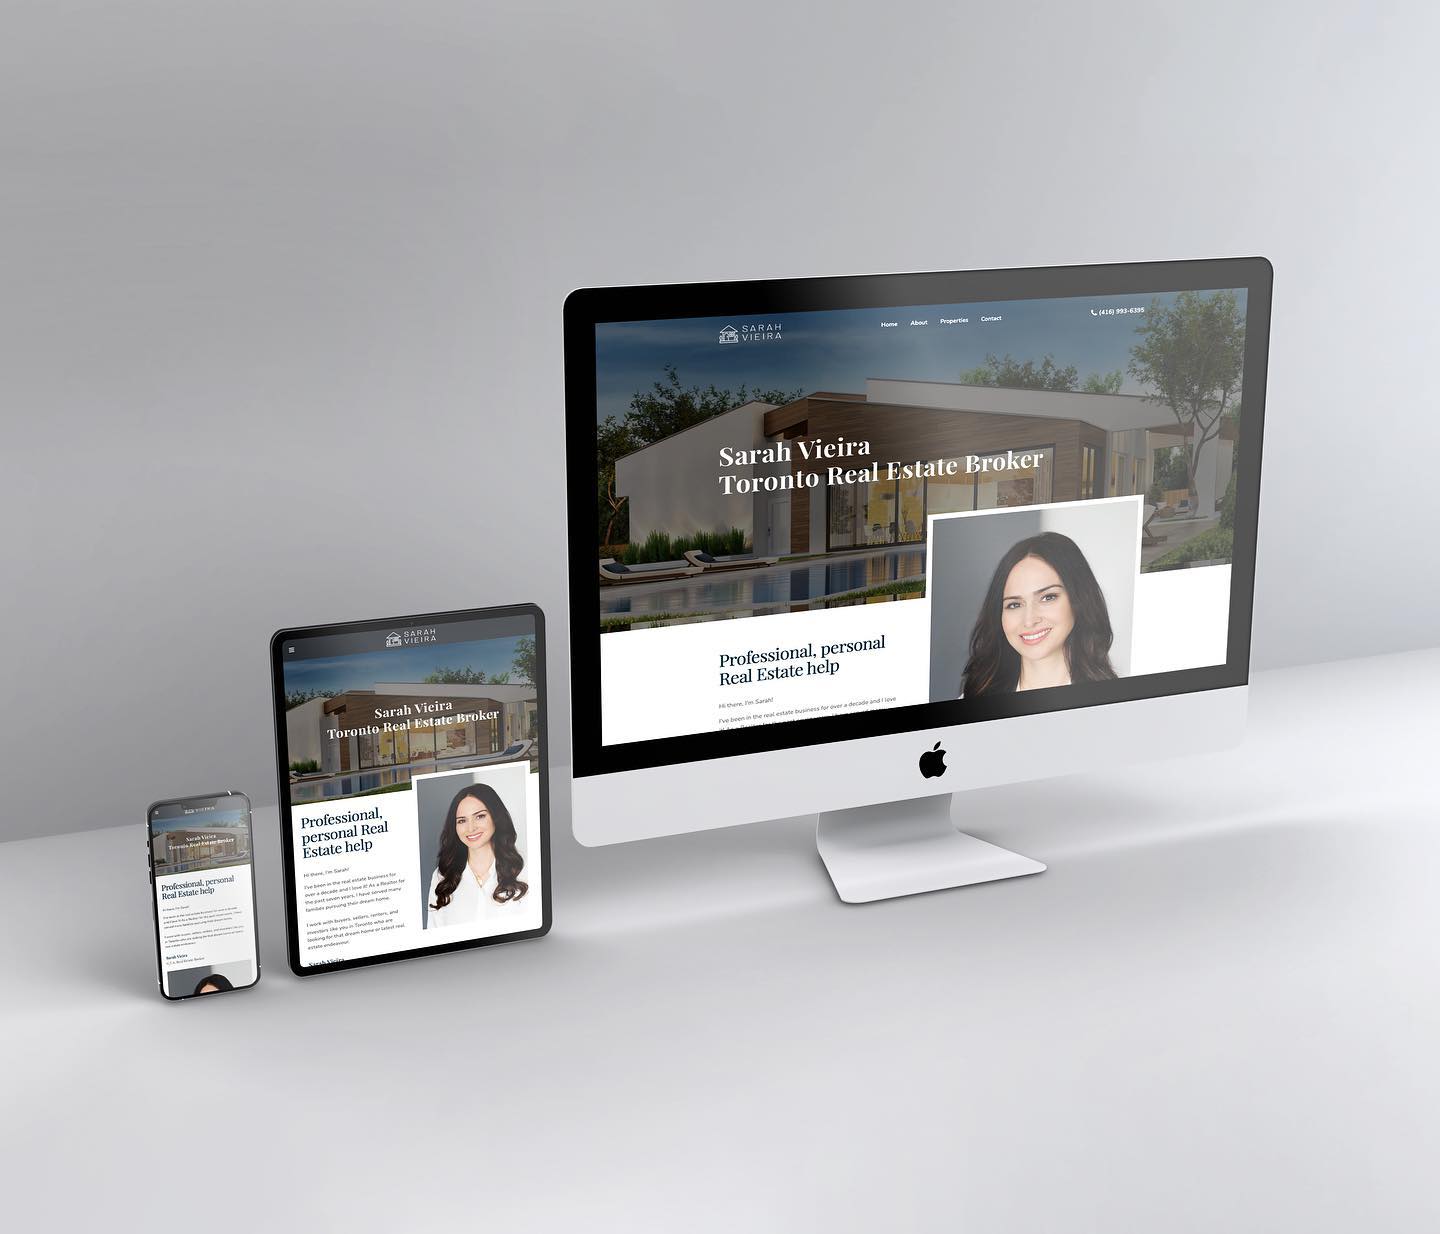 Real Estate Professionals, are you paying too much for your website? We hear that a lot of you are and we’d like to help. 

Give us a call to discuss your business. 613.519.5655

#ygkrealestate #realestateagent #realestateygk #ygkrealestate